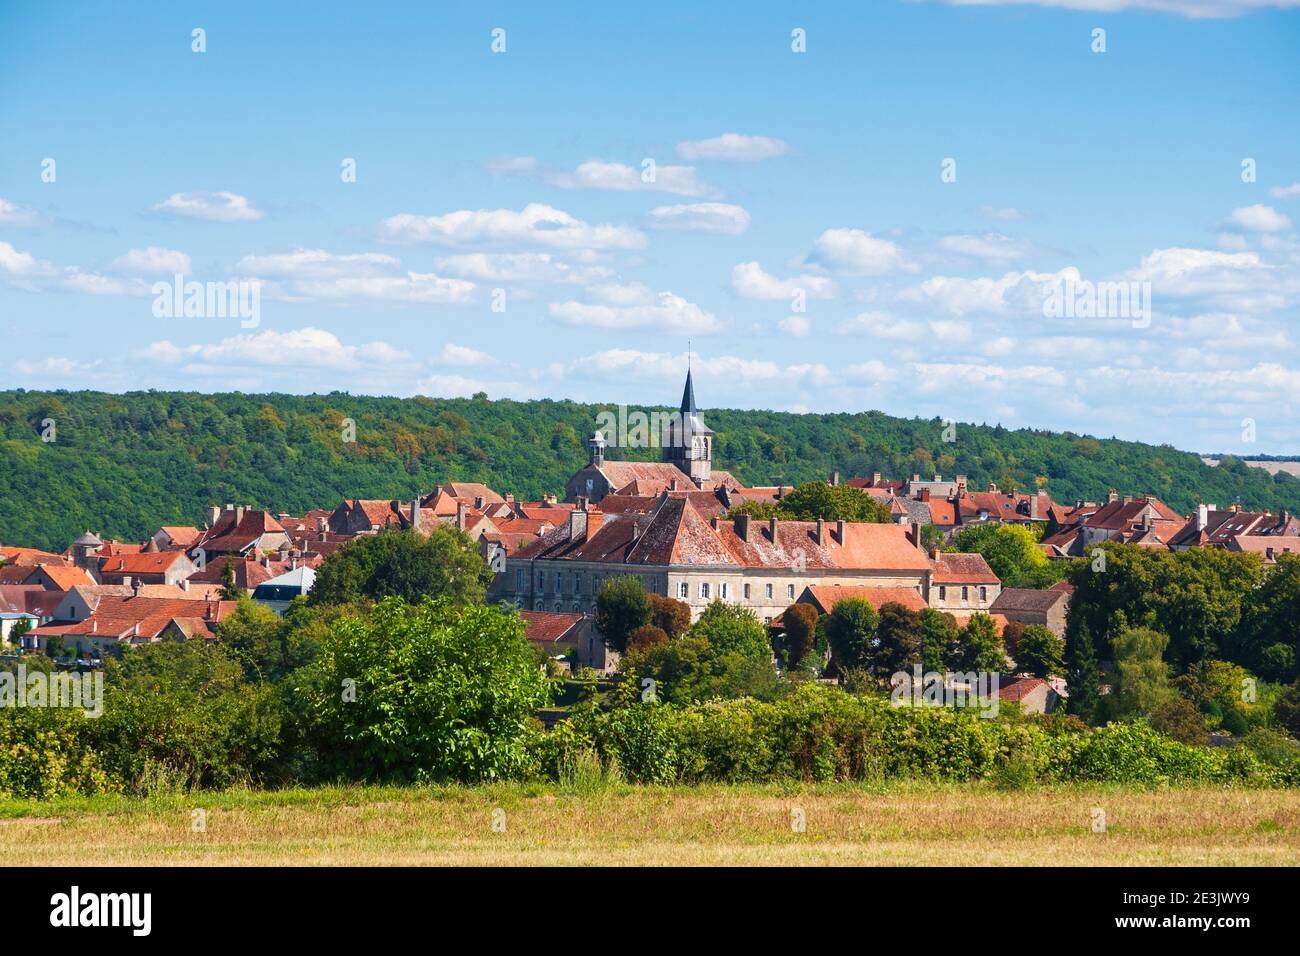 France country travel. Scenic view of Flavigny-sur-Ozerain medieval village in Burgundy listed as one of France's most beautiful villages. Stock Photo